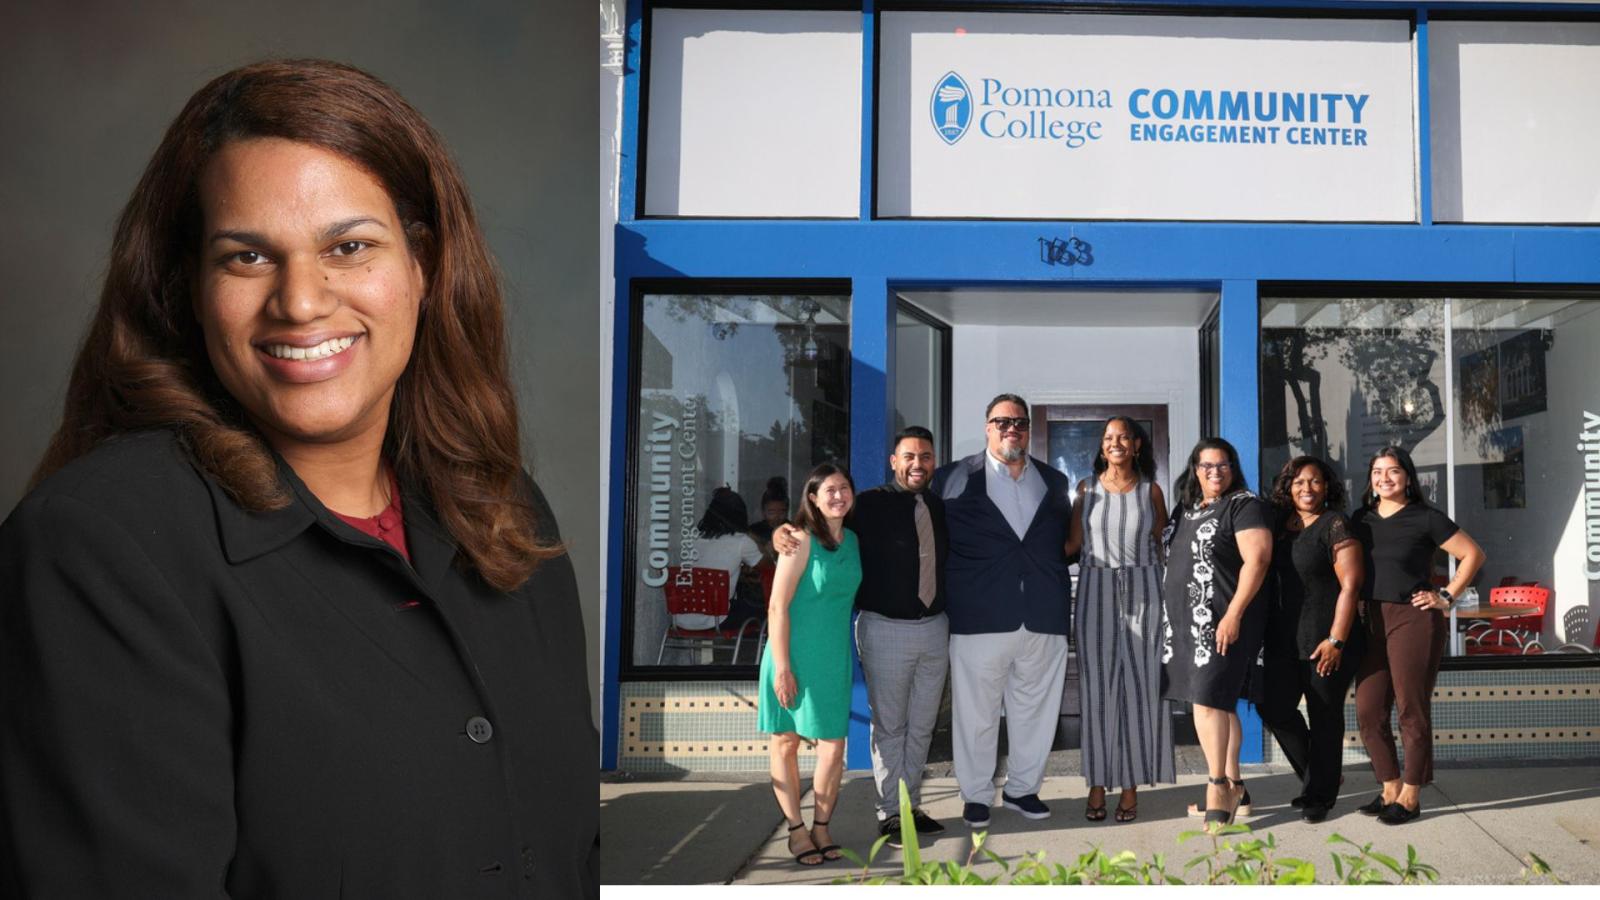 April Mayes Headshot along with Photo of Her and Draper Center Staff at the Pomona College Community Engagement Center